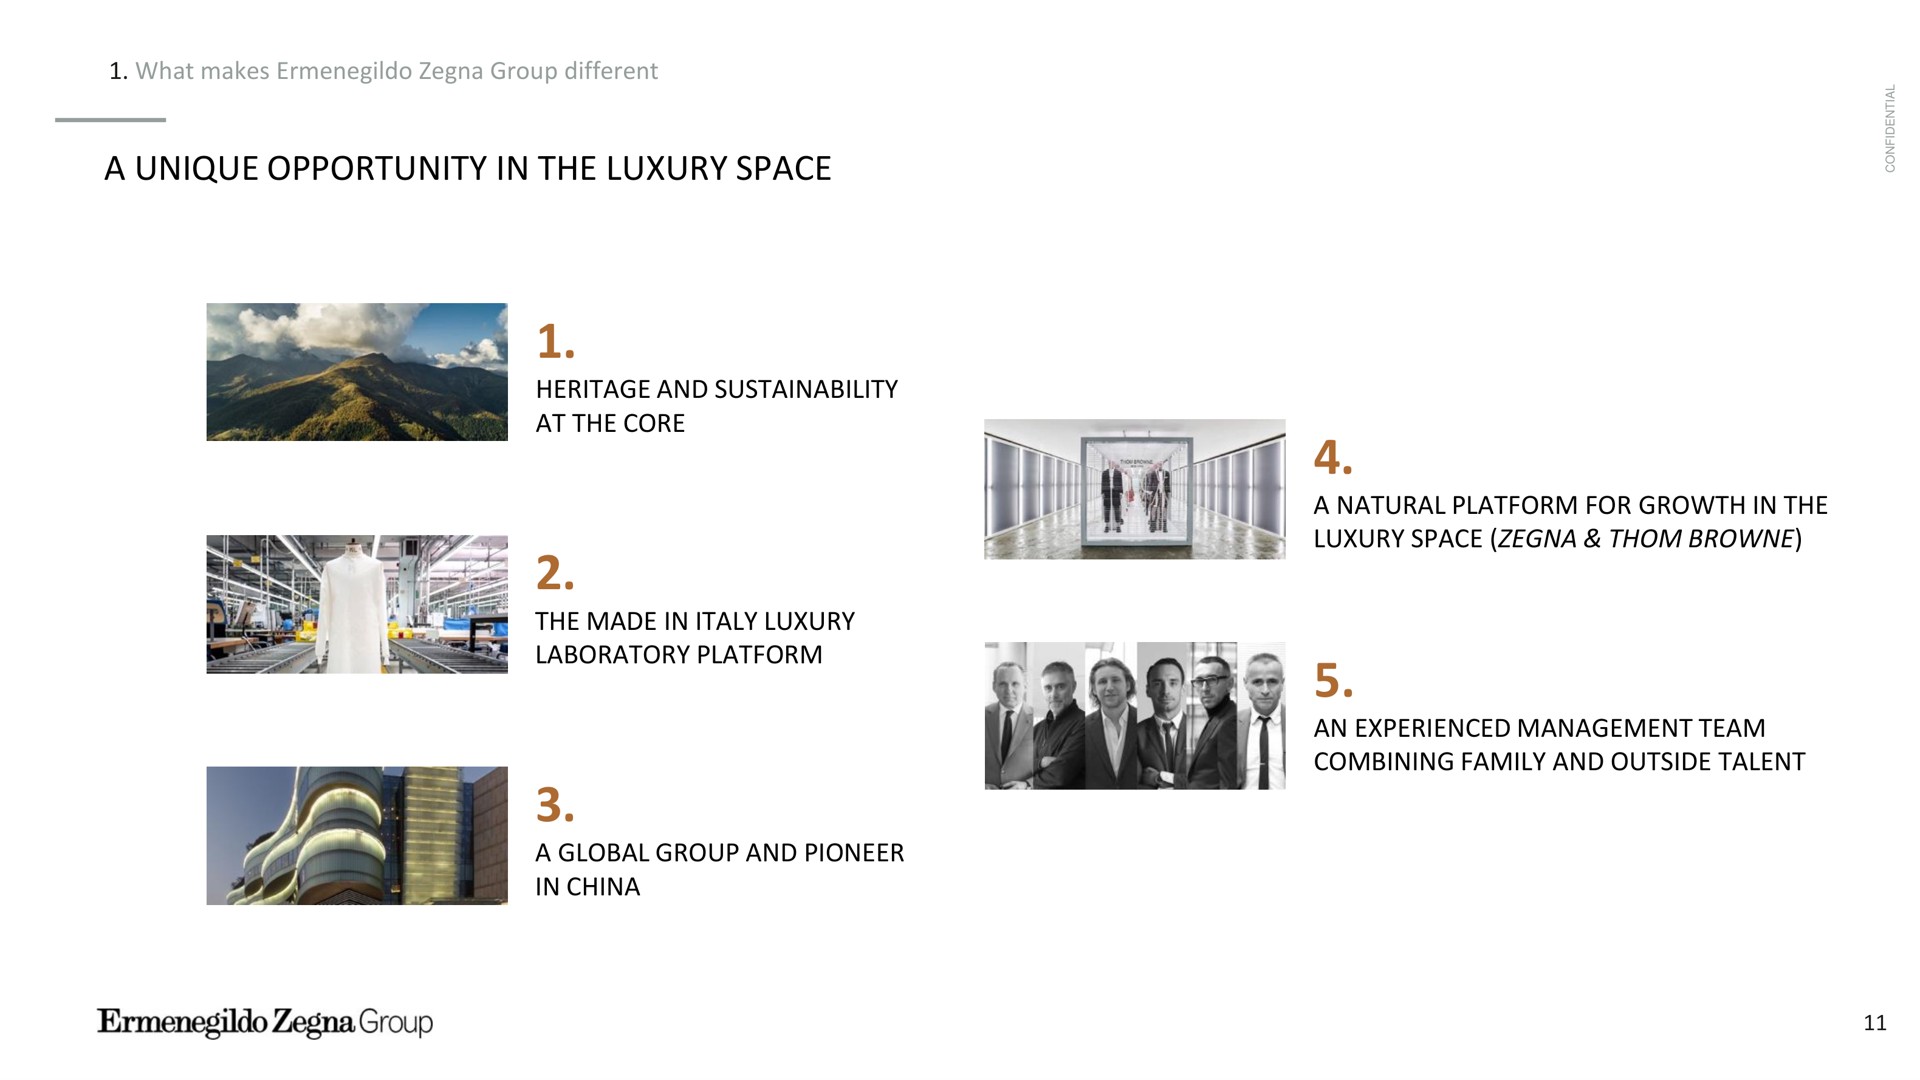 what makes group different a unique opportunity in the luxury space heritage and at the core the made in luxury laboratory platform a global group and pioneer in china a natural platform for growth in the luxury space an experienced management team combining family and outside talent | Zegna